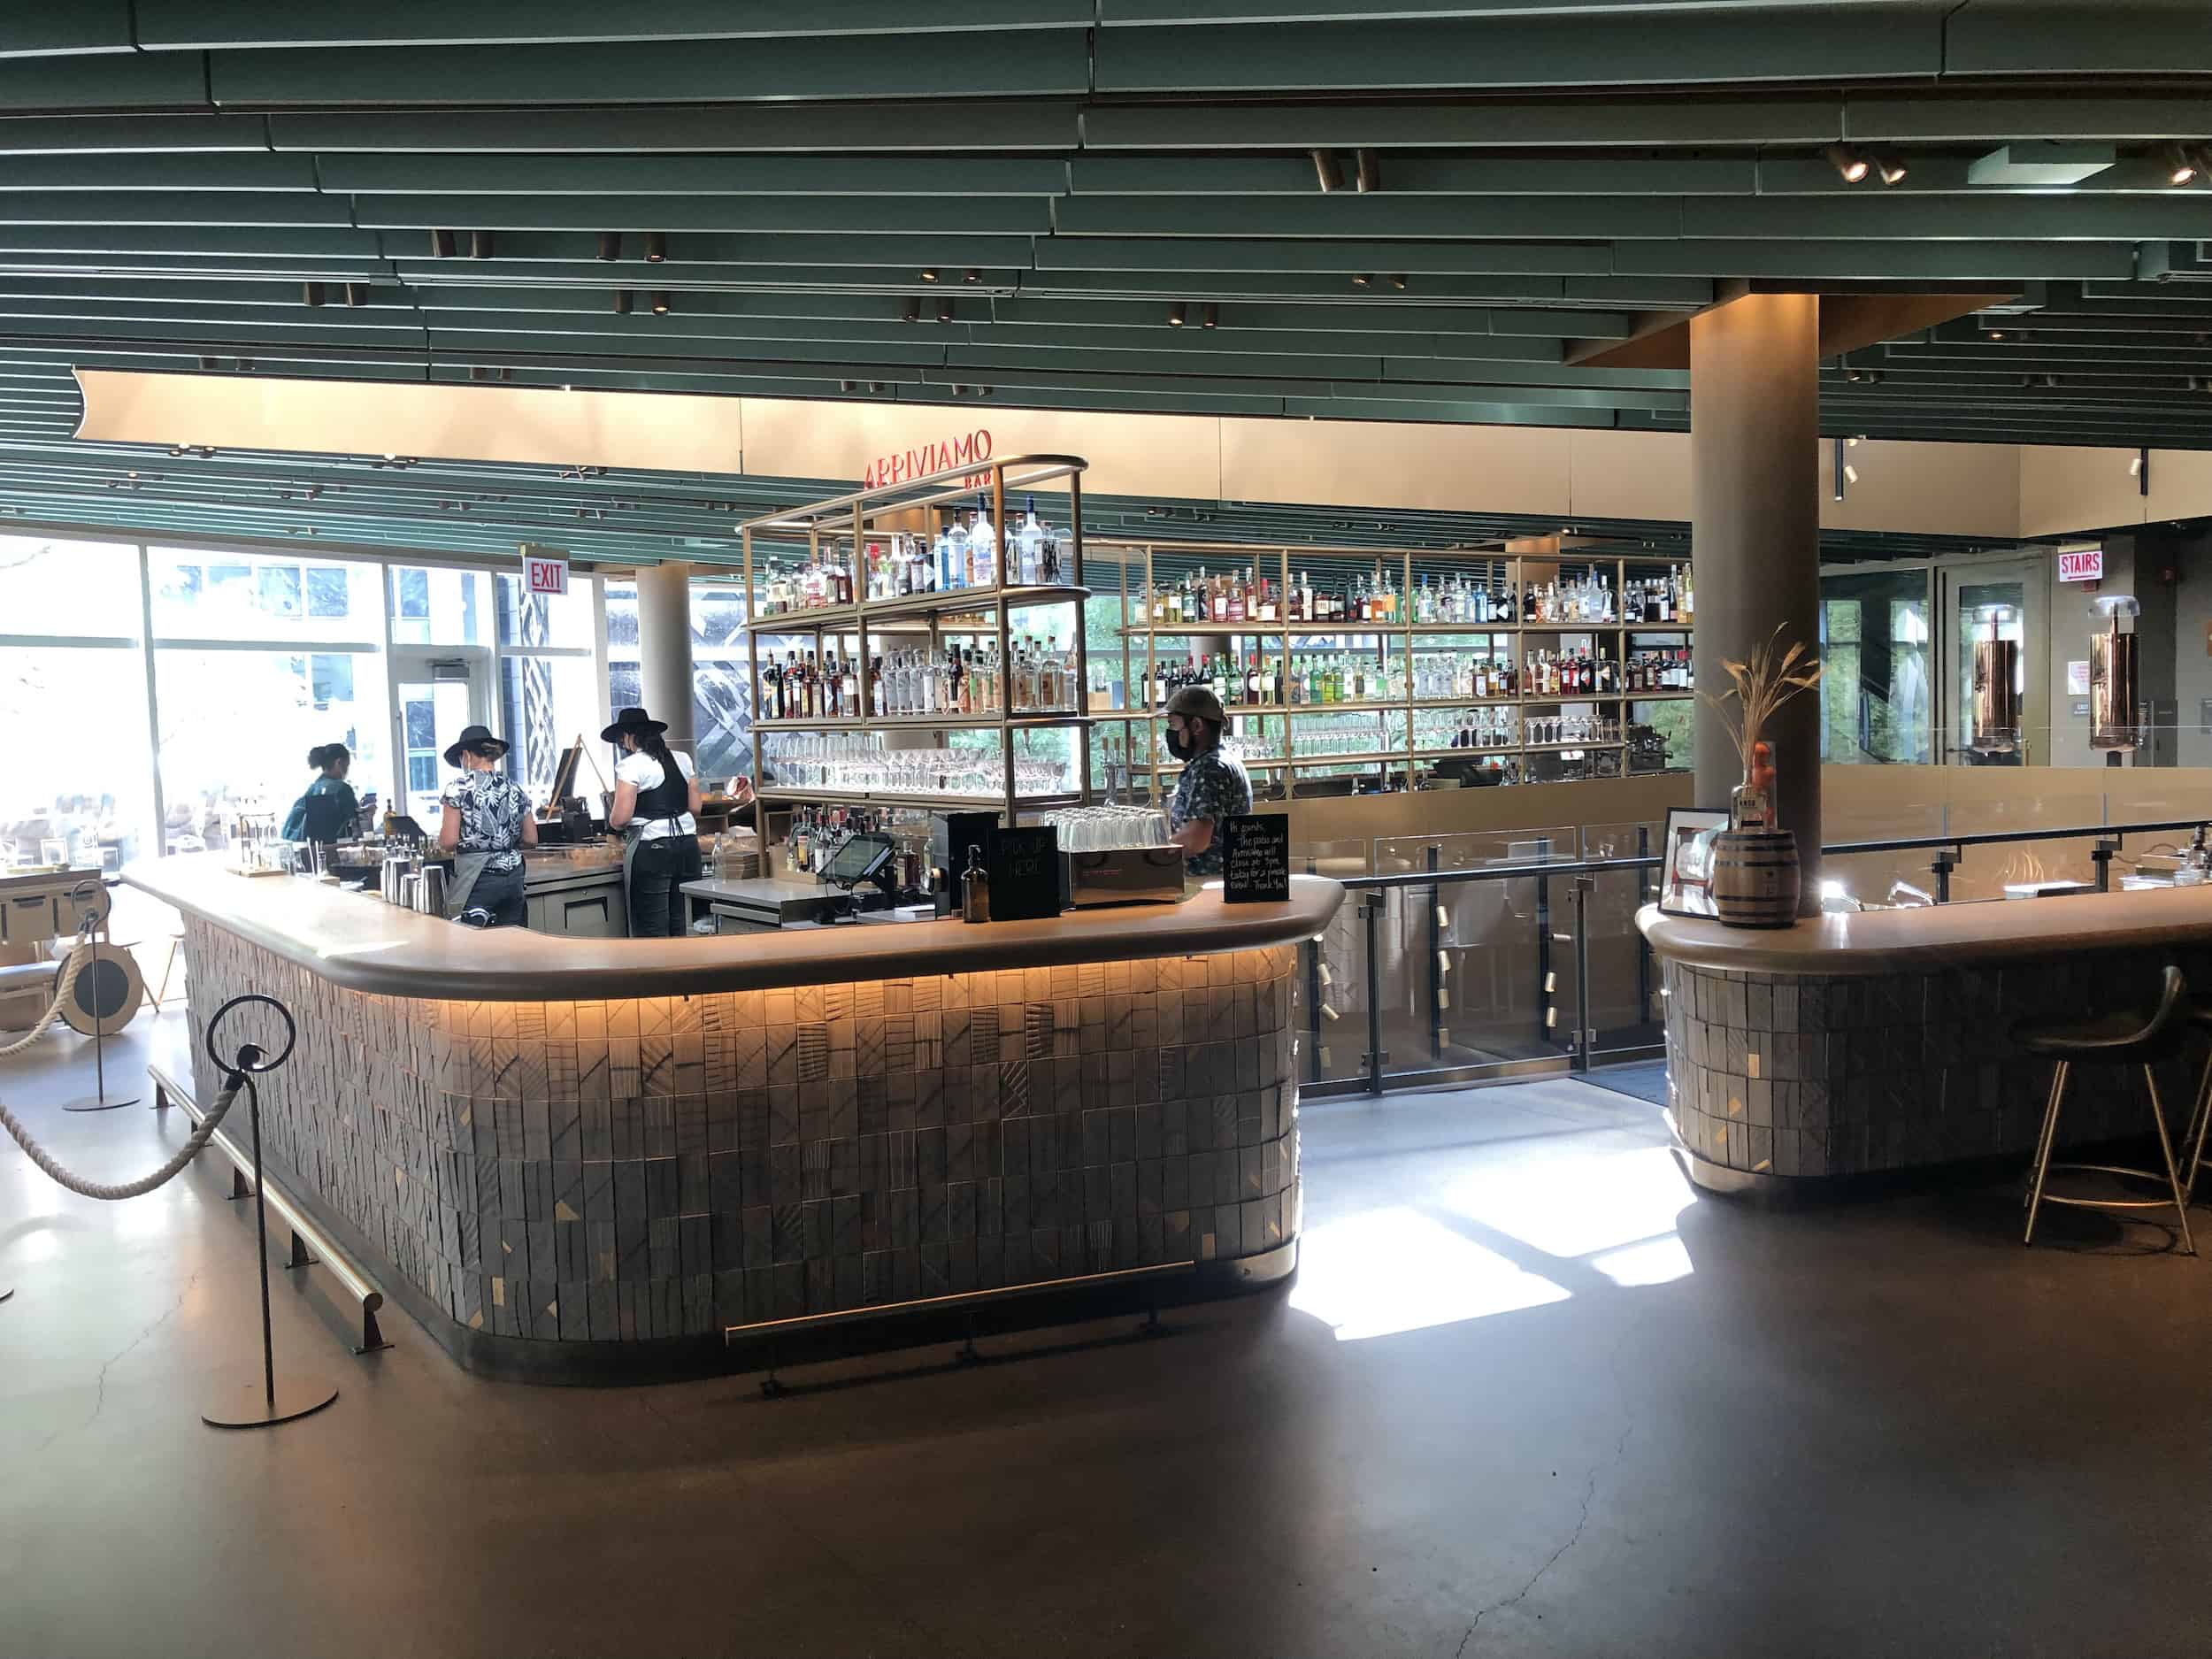 Fourth floor bar at the Starbucks Reserve Roastery along the Magnificent Mile in Chicago, Illinois